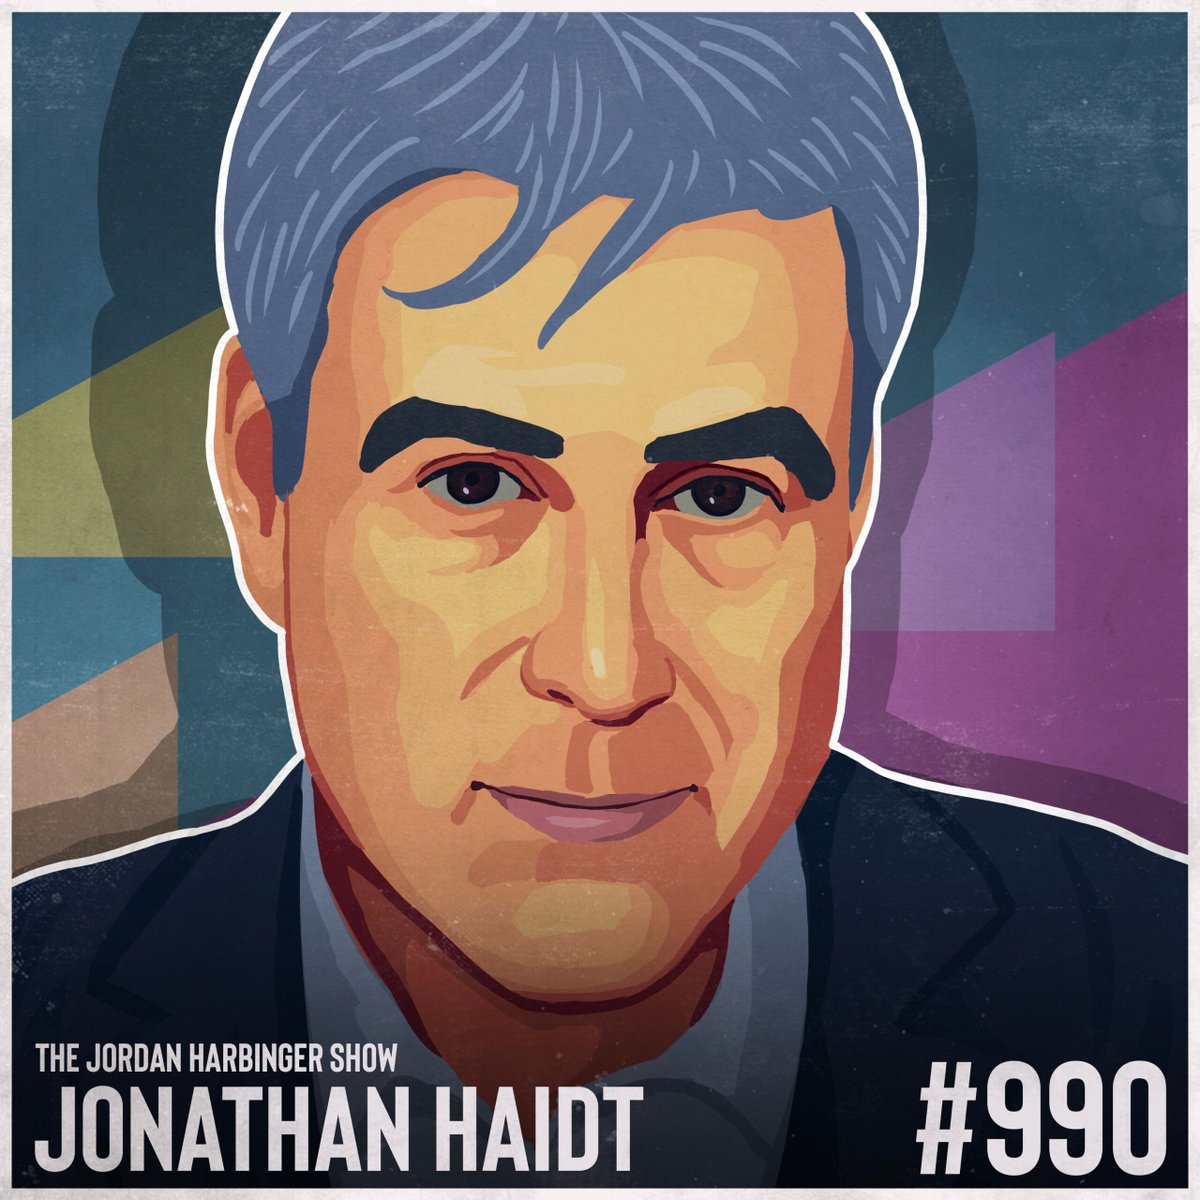 . @JonHaidt returns to discuss his latest book, 'The Anxious Generation: How the Great Rewiring of Childhood Is Causing an Epidemic of Mental Illness.' Notes buff.ly/4ajgkDc Apple buff.ly/2RRoxcb Spotify buff.ly/3mrKq1v Overcast buff.ly/3mpWrlb